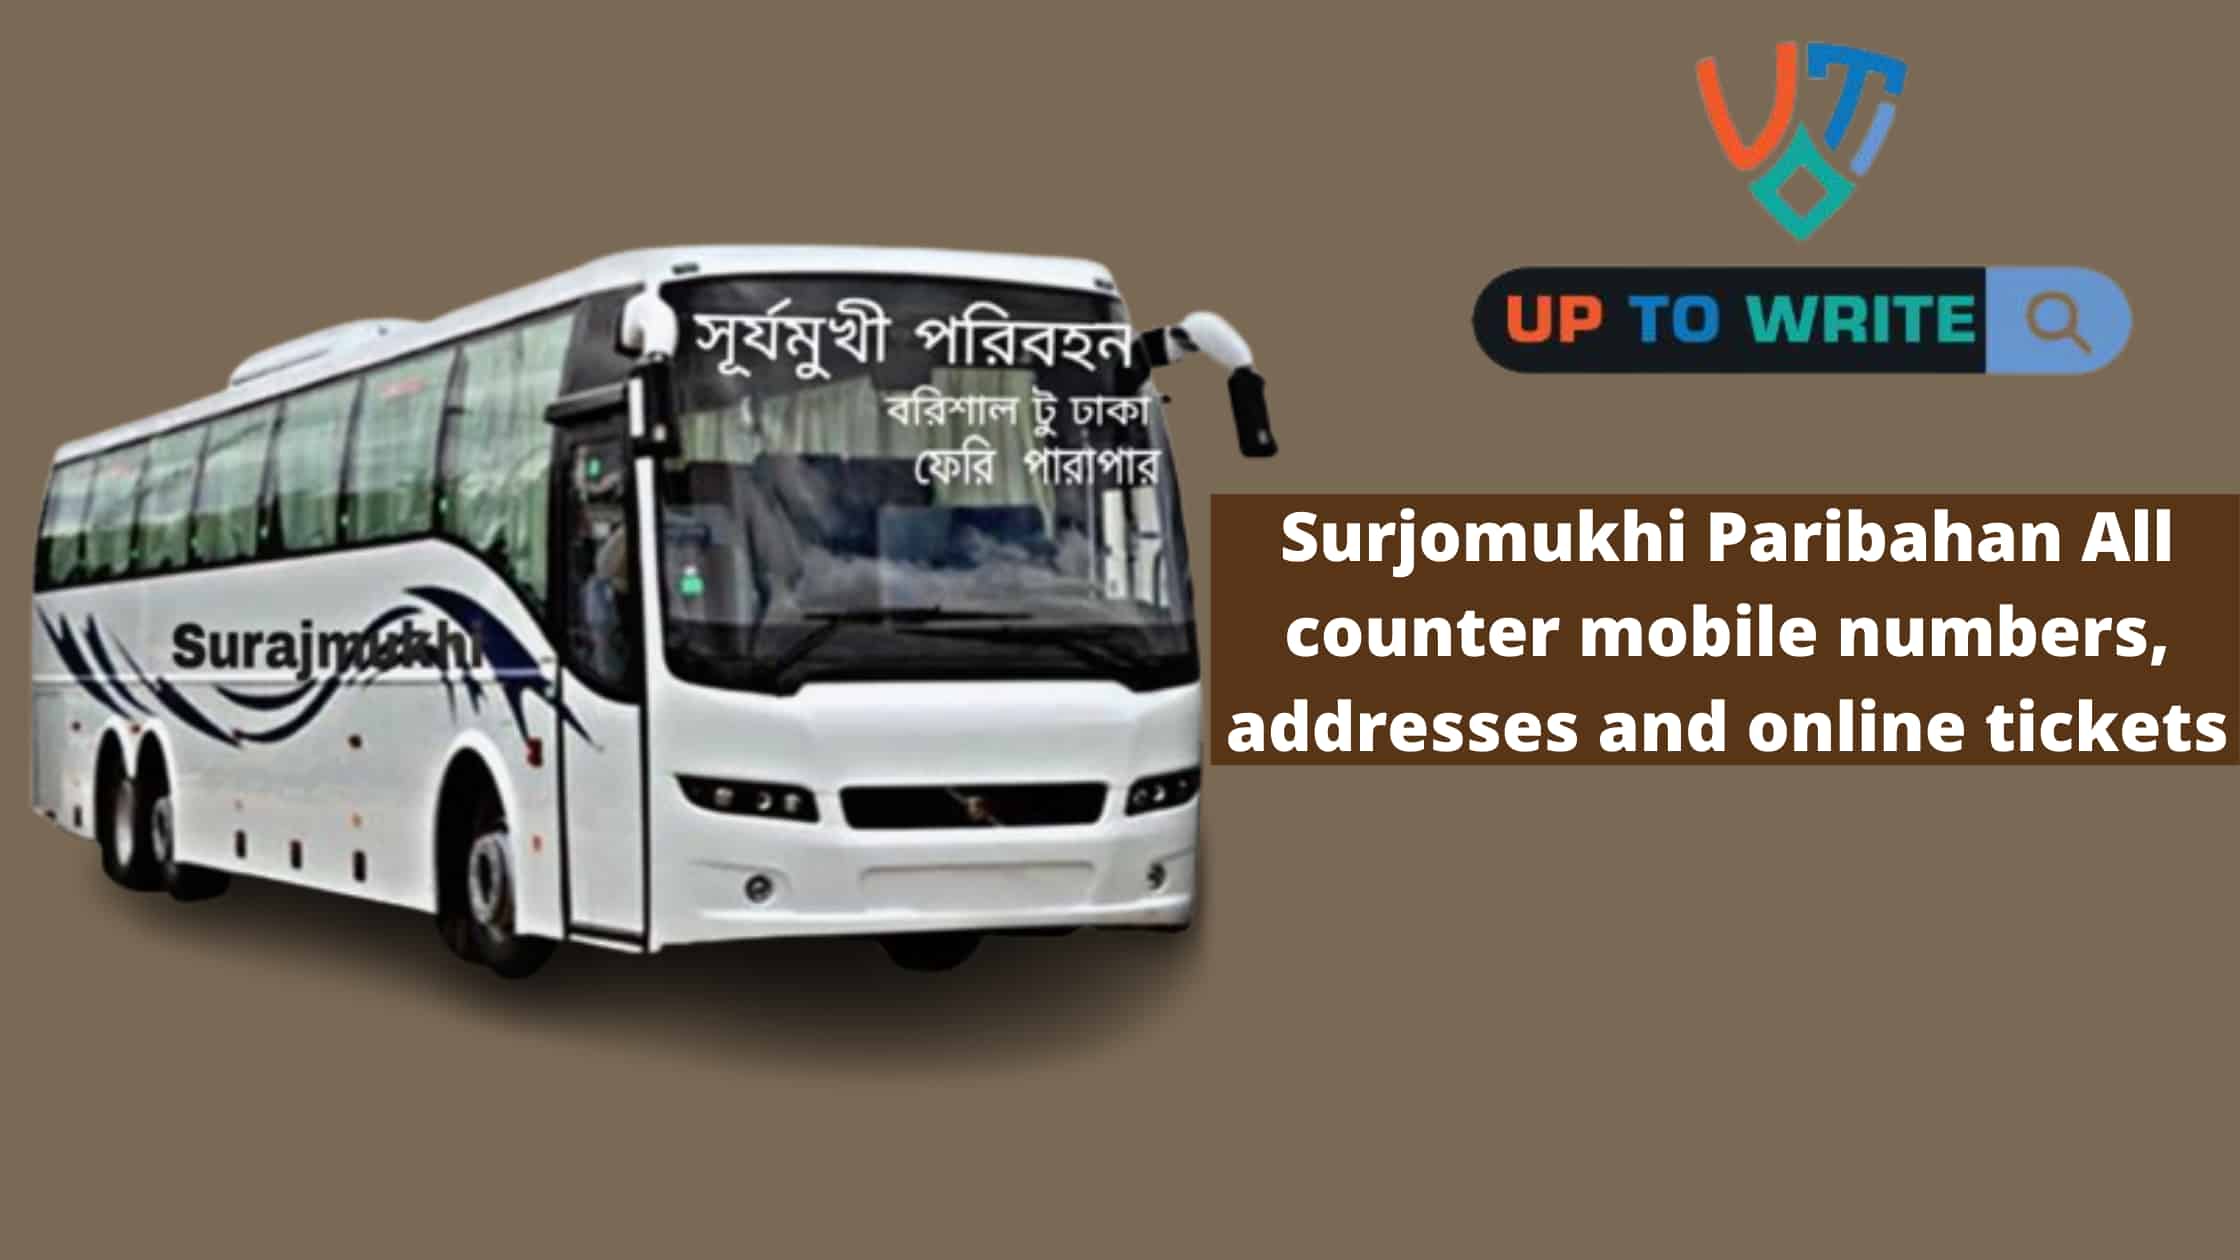 Surjomukhi Paribahan All counter mobile numbers, addresses and online tickets